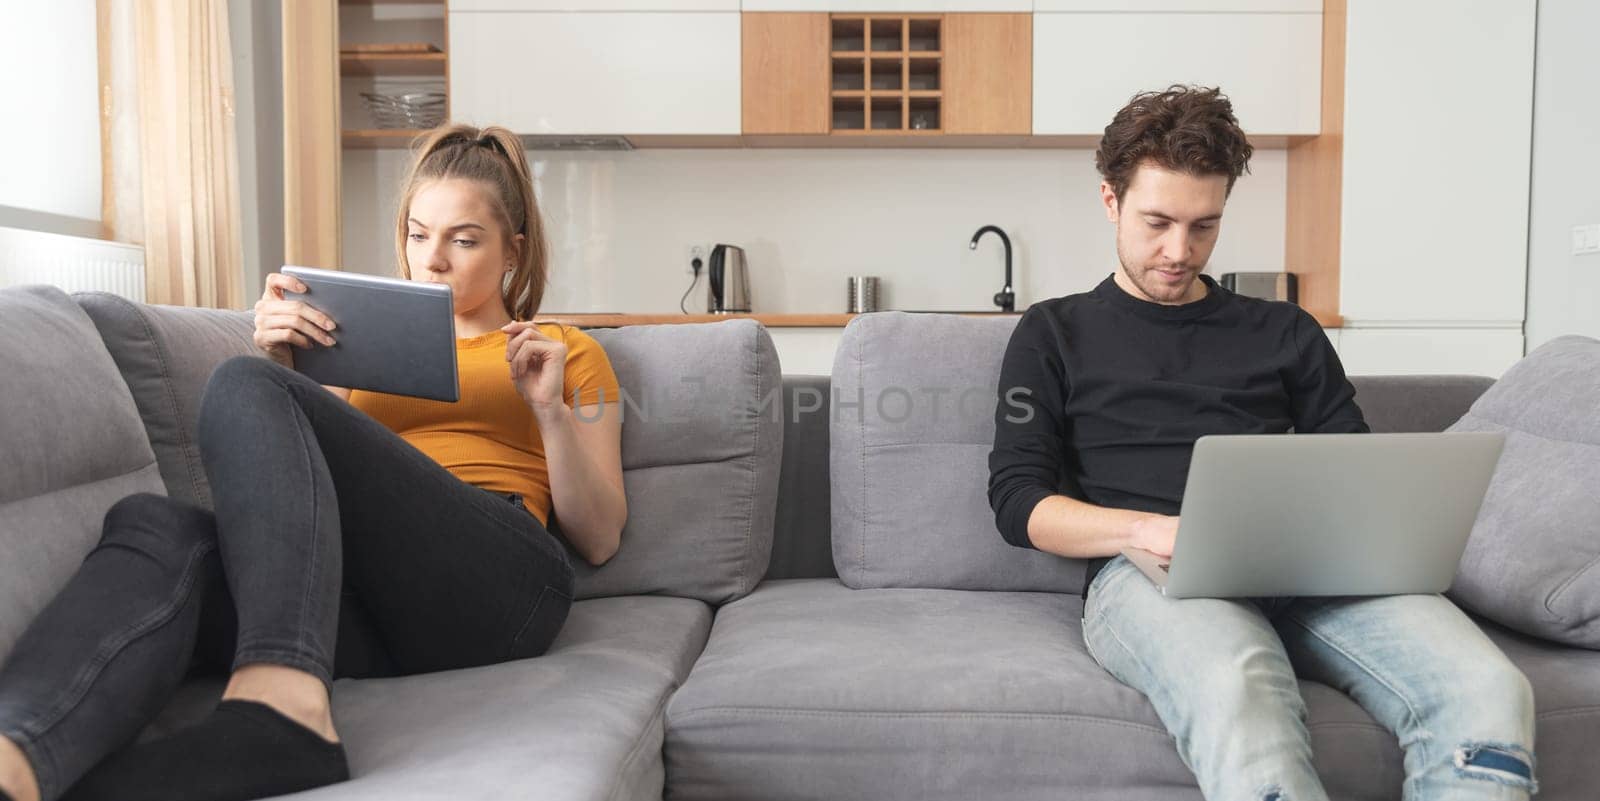 Crisis in a partnership, separation, internet addiction. Couple separated on sofa in living room